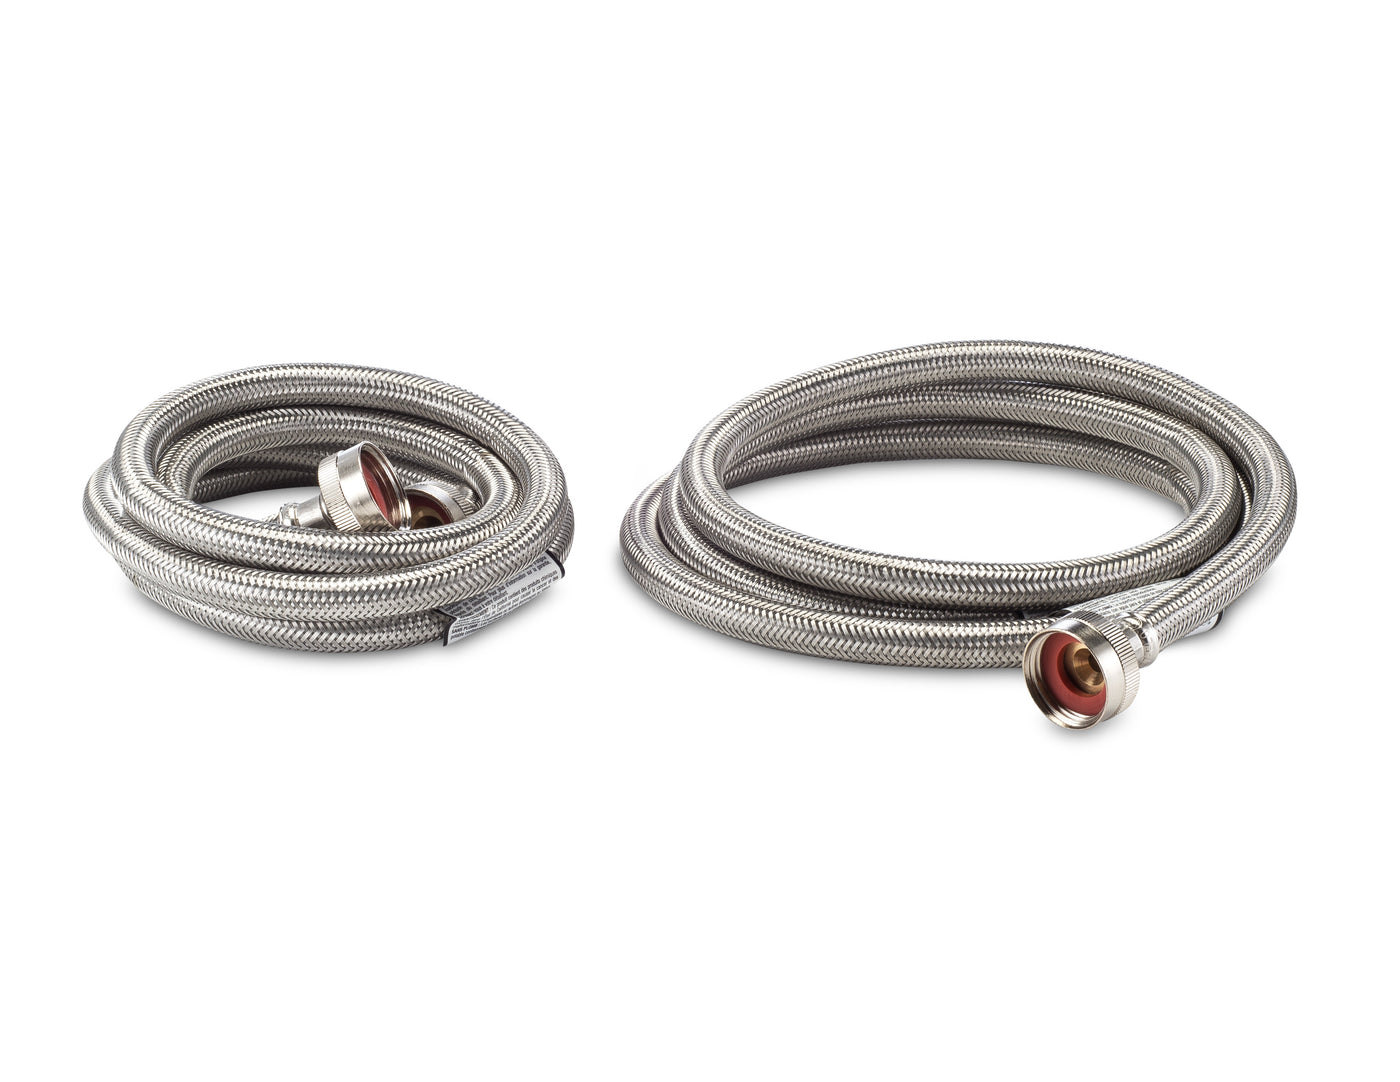 Frigidaire 6' Smart Choice Braided Stainless Steel Washer Fill Hose